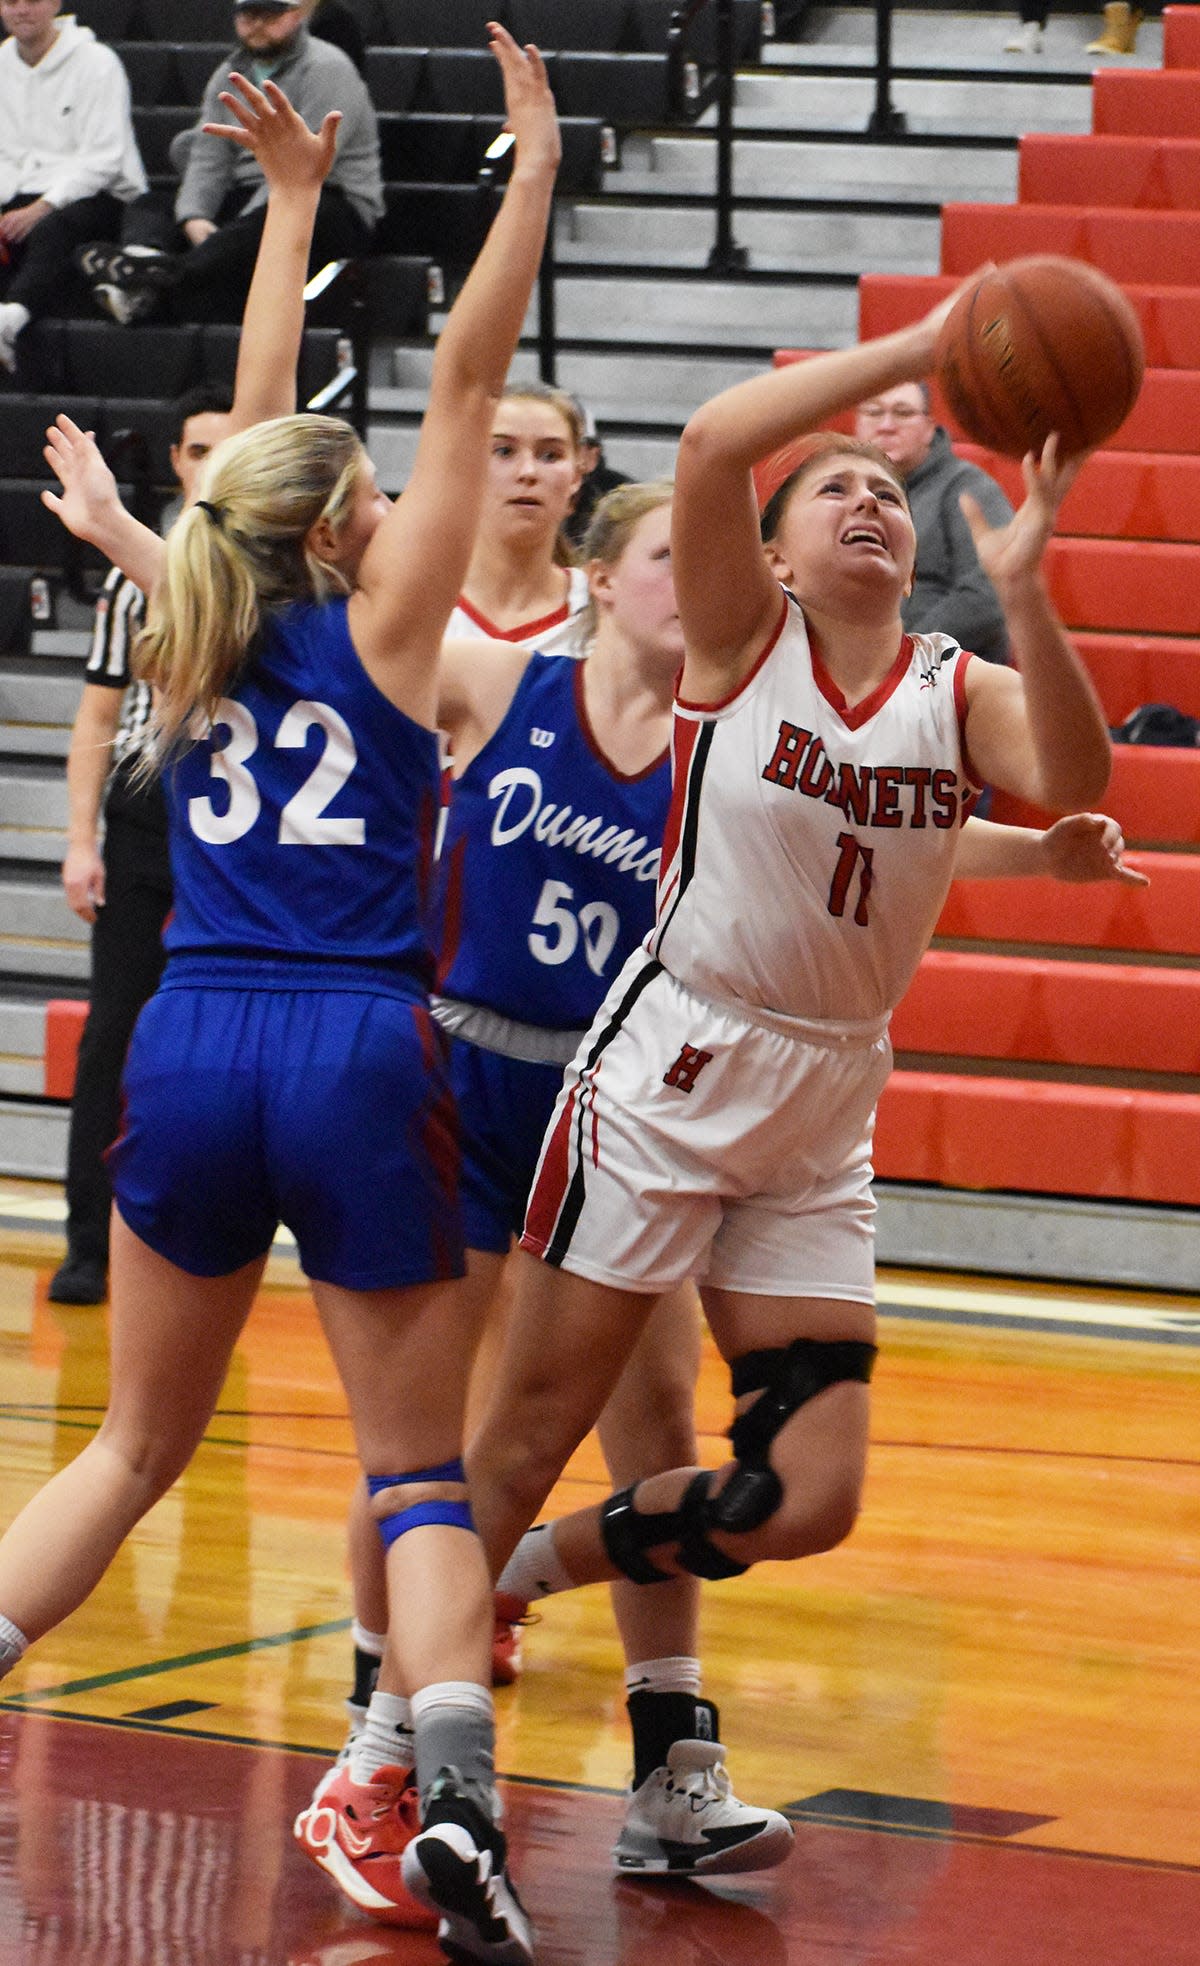 Elyse Montgomery of Honesdale powers her way to a bucket. The senior captain is this year's Pacesetter "For the Love of the Game" award winner.